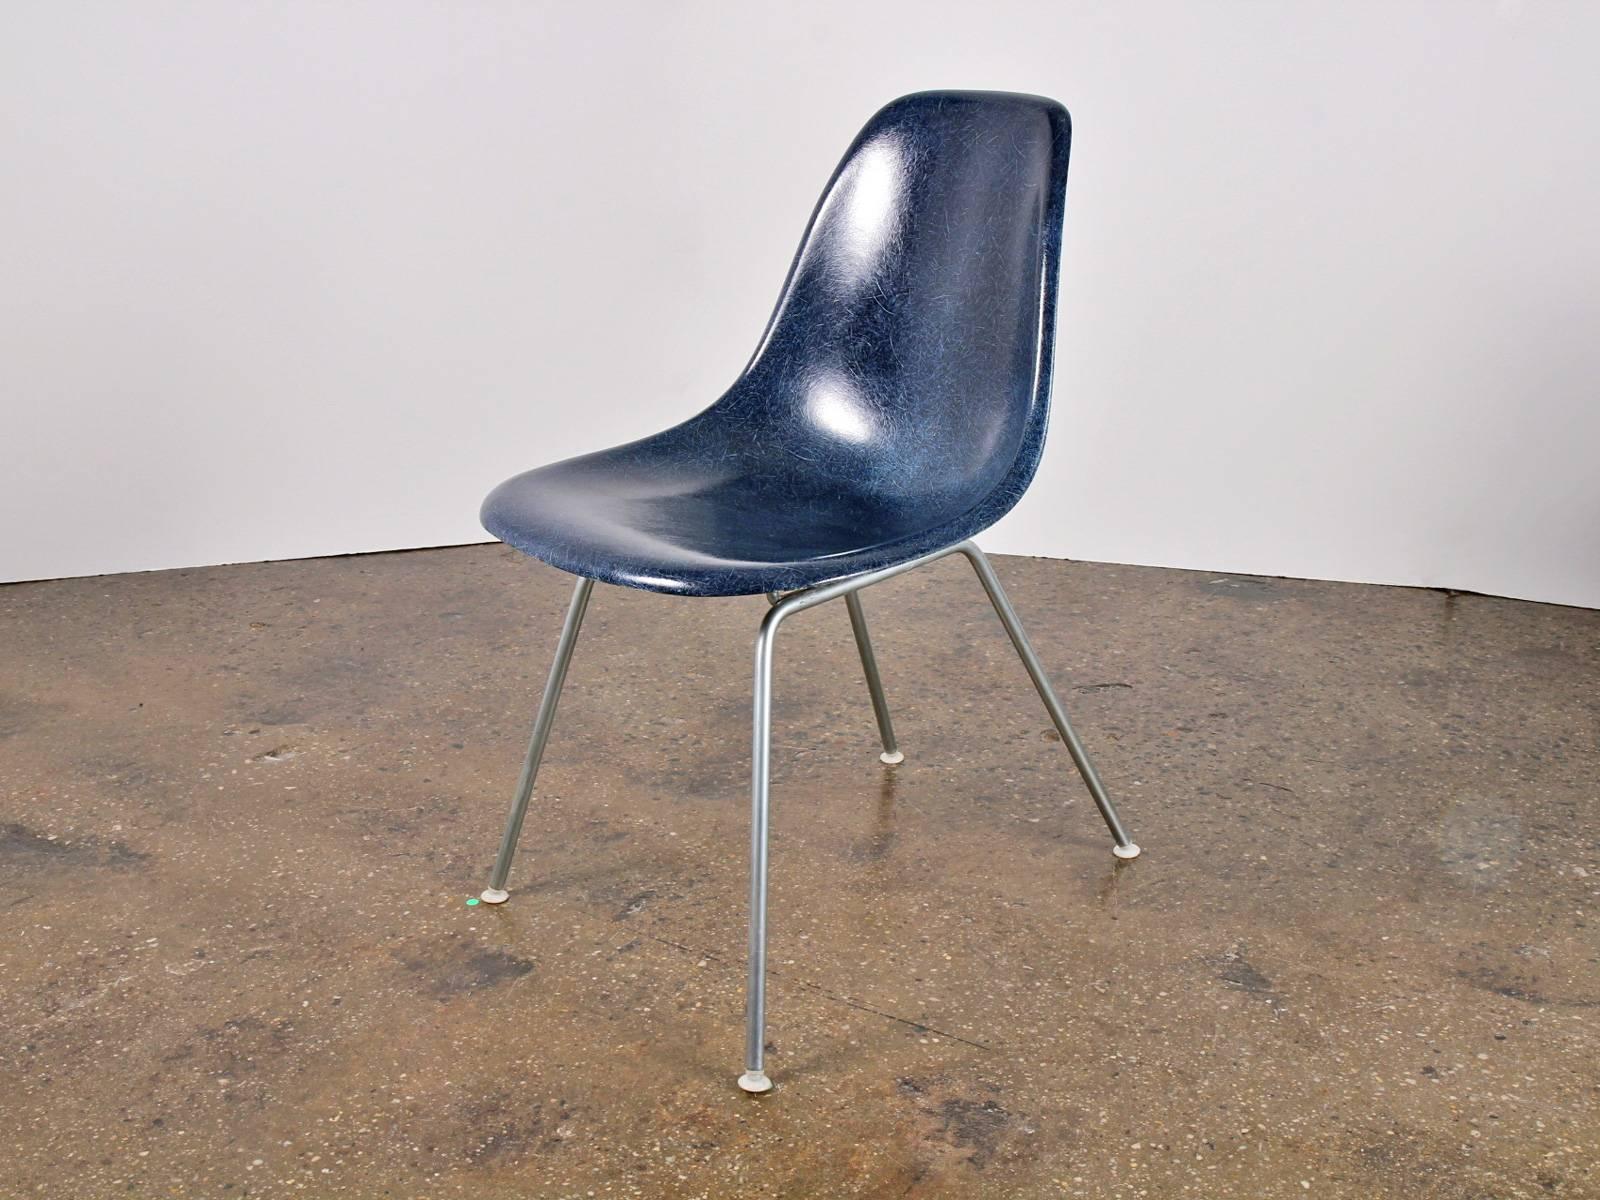 Original Navy Blue Molded Fiberglass Shell Chair, designed by Charles and Ray Eames for Herman Miller. Vintage shell chairs are prized for their attractive patina, distinct thread texture and beautiful depth of color seen in the fiberglass material.